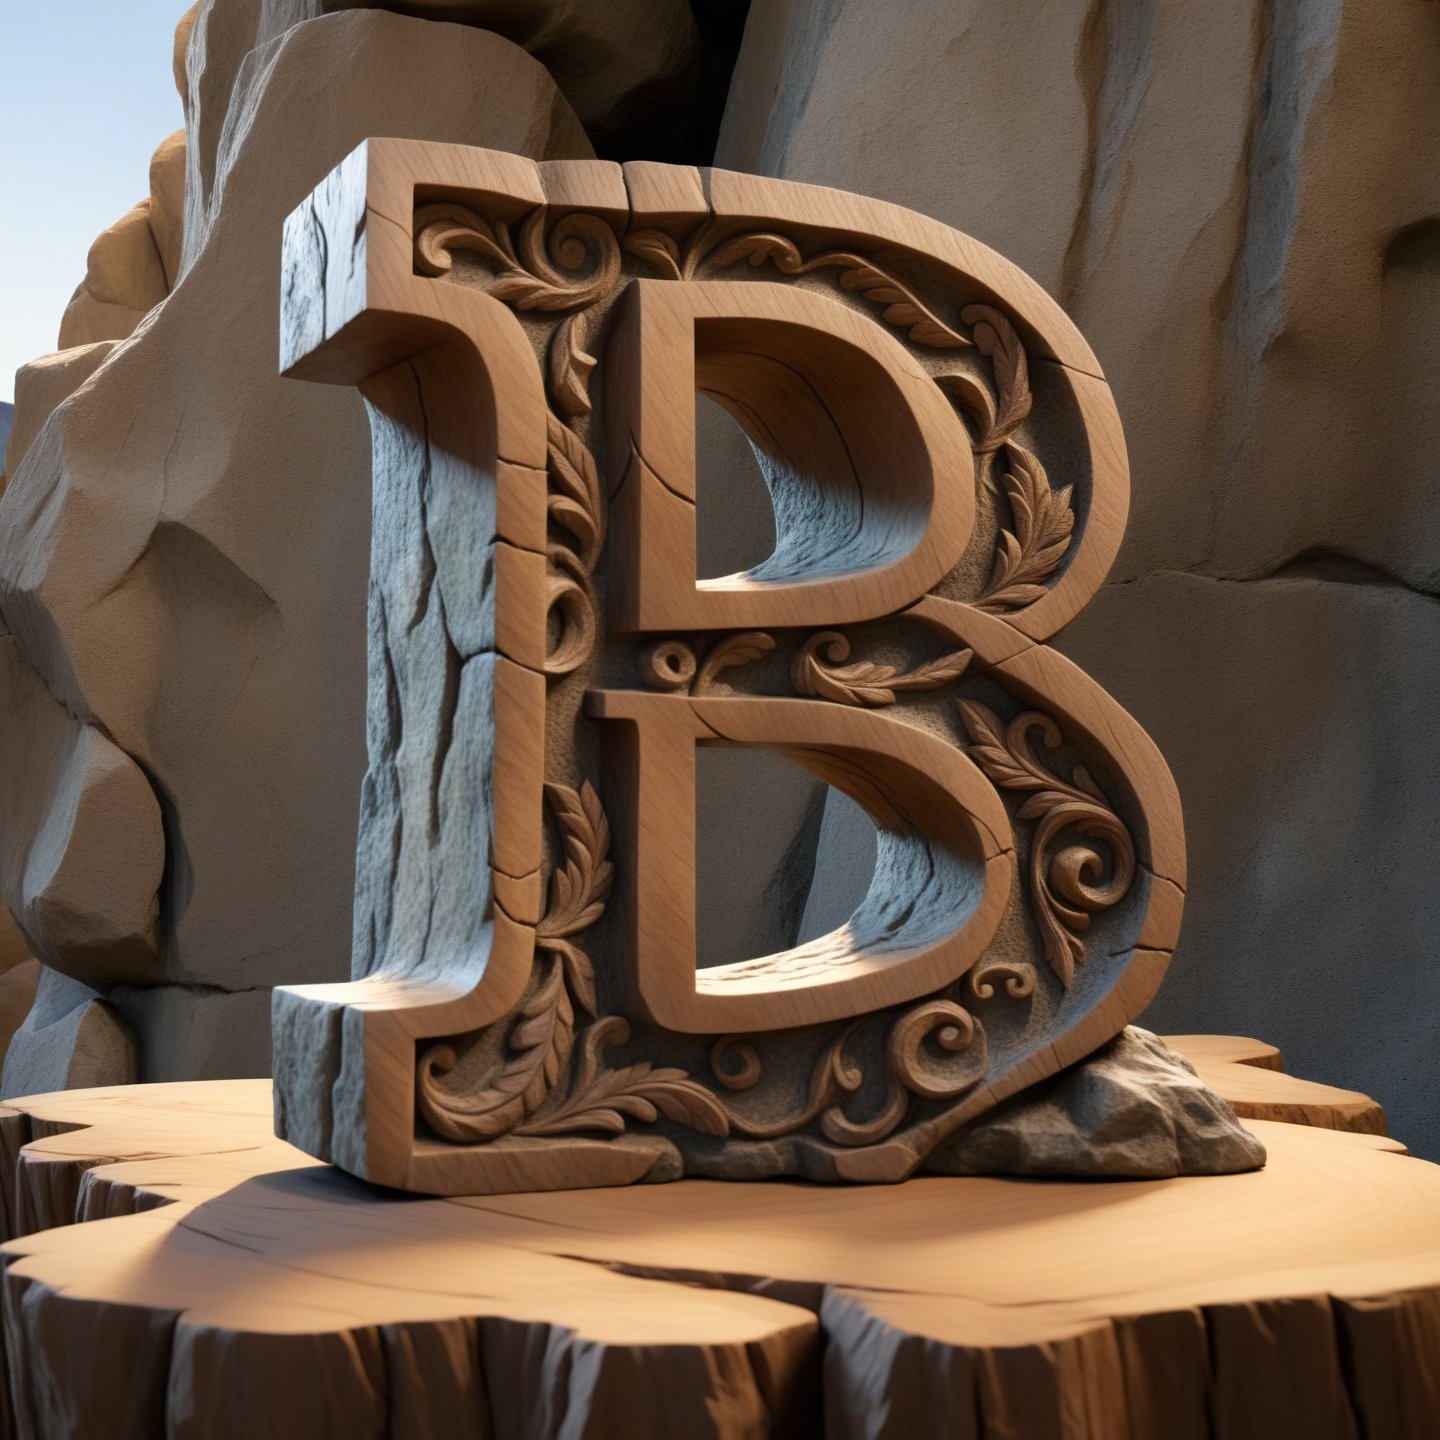 single rustic and robust capital letter B carved into the rock ornament  in vertical position over single clear wood table, all bords  soft curved, no corners